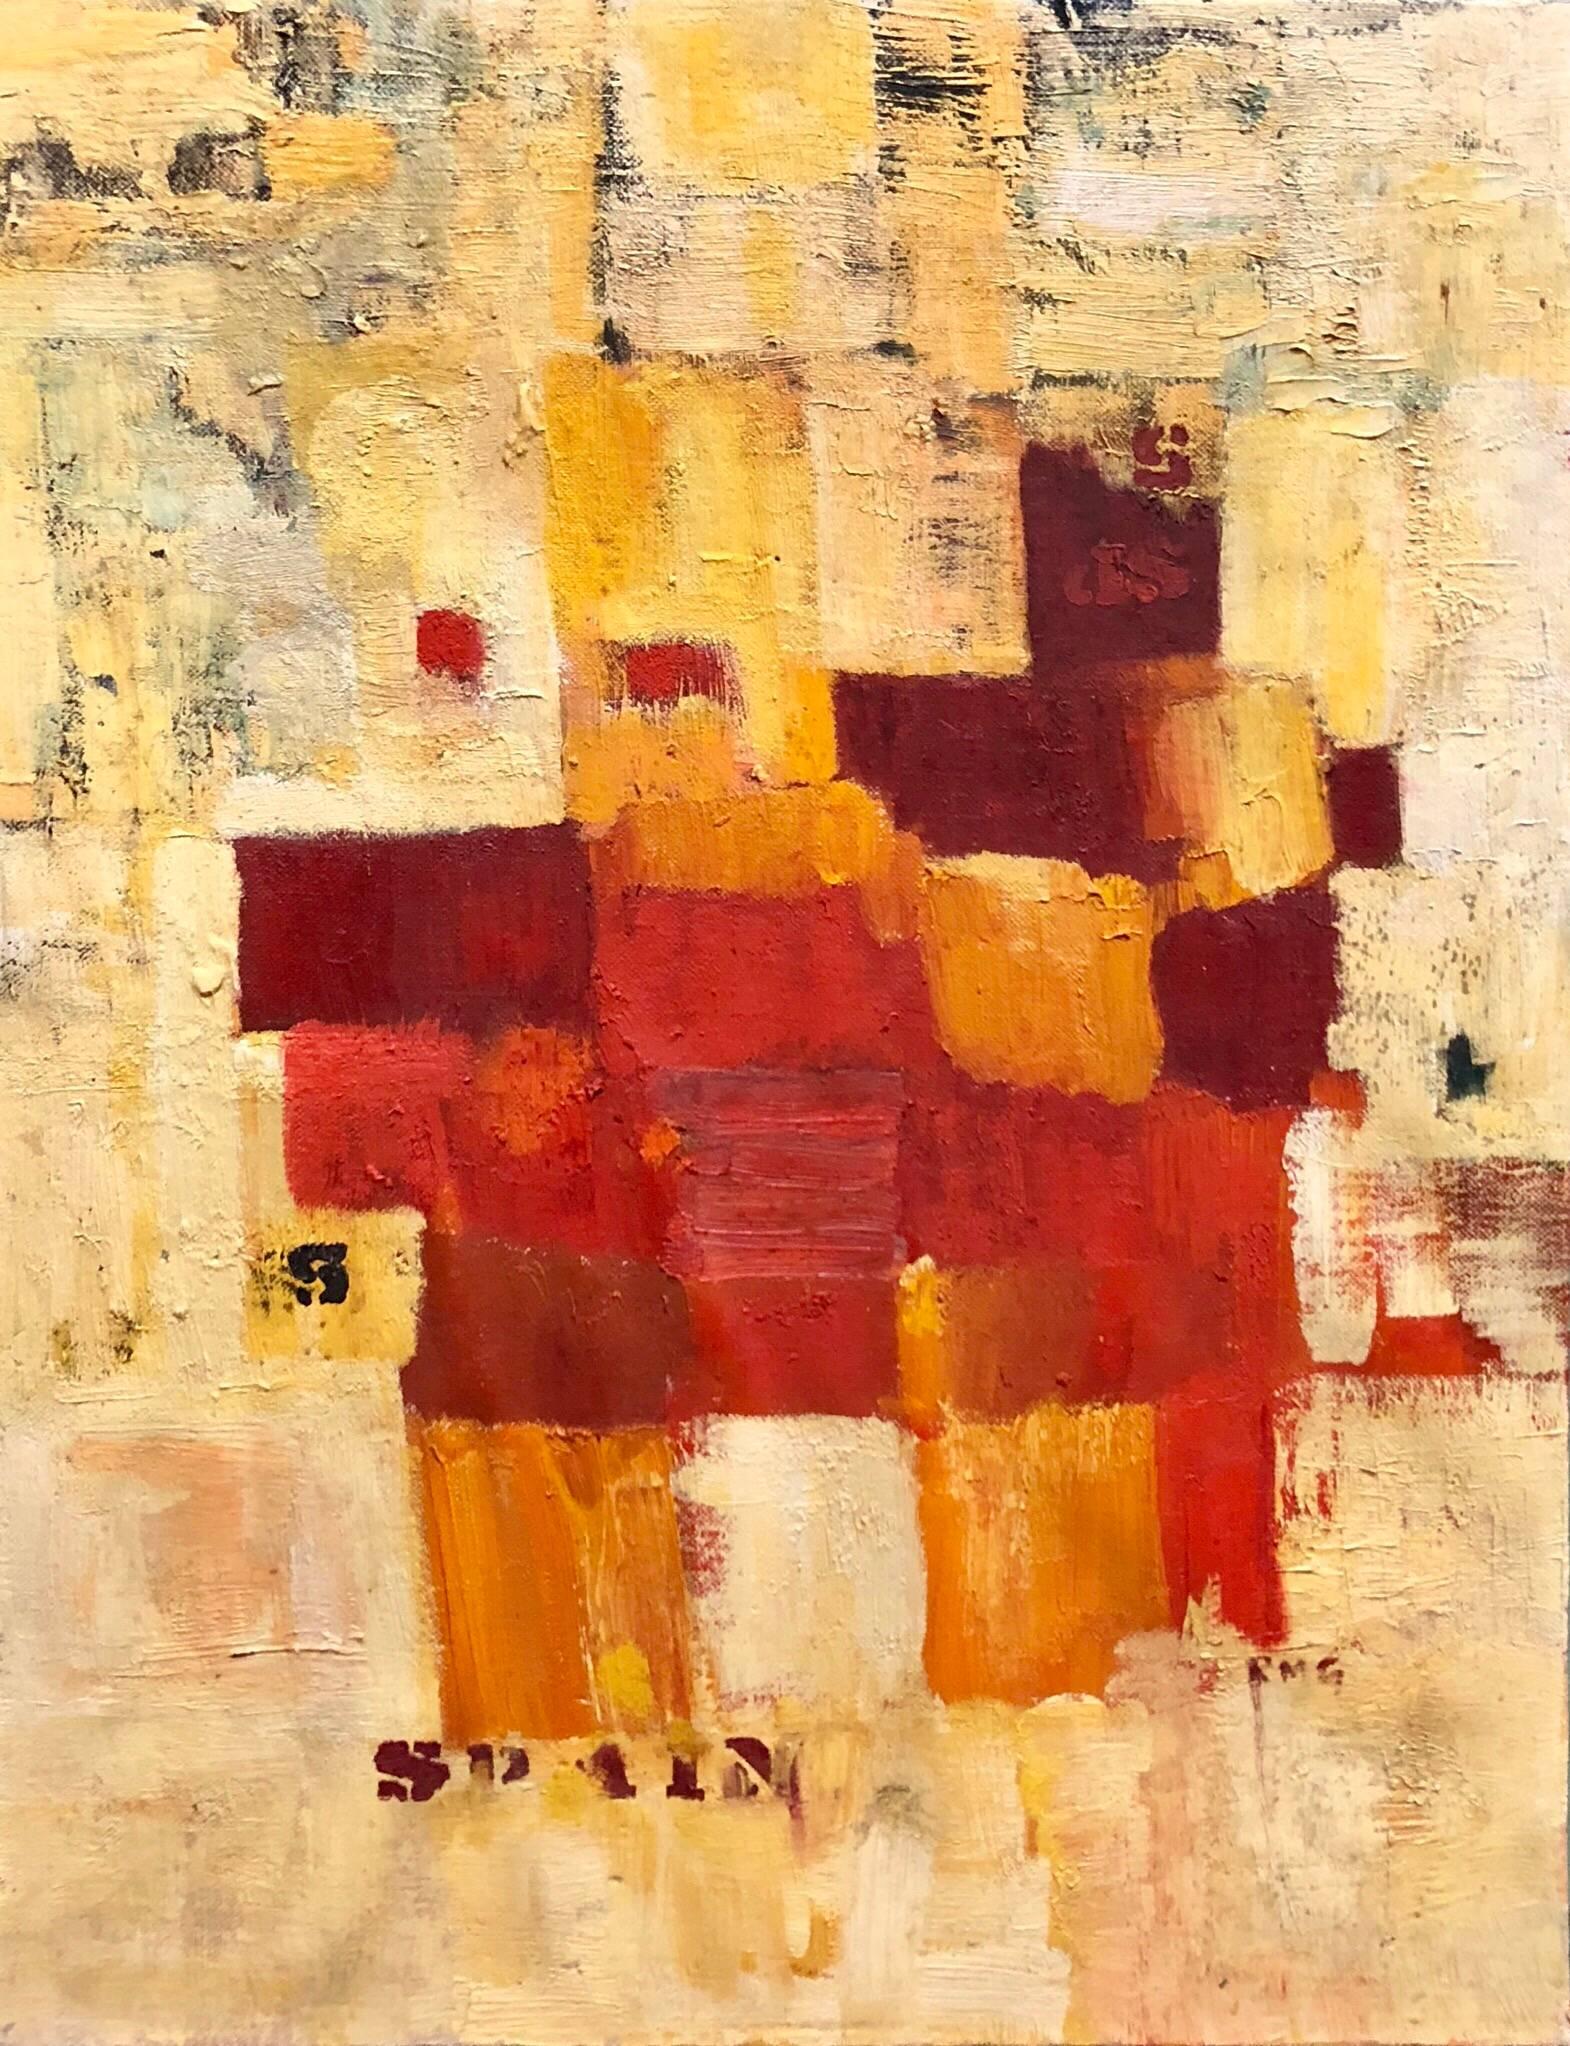 Unknown Abstract Painting - Abstract Orange Squares on Yellow "Spain" Stencilled Letters Mod Oil Painting